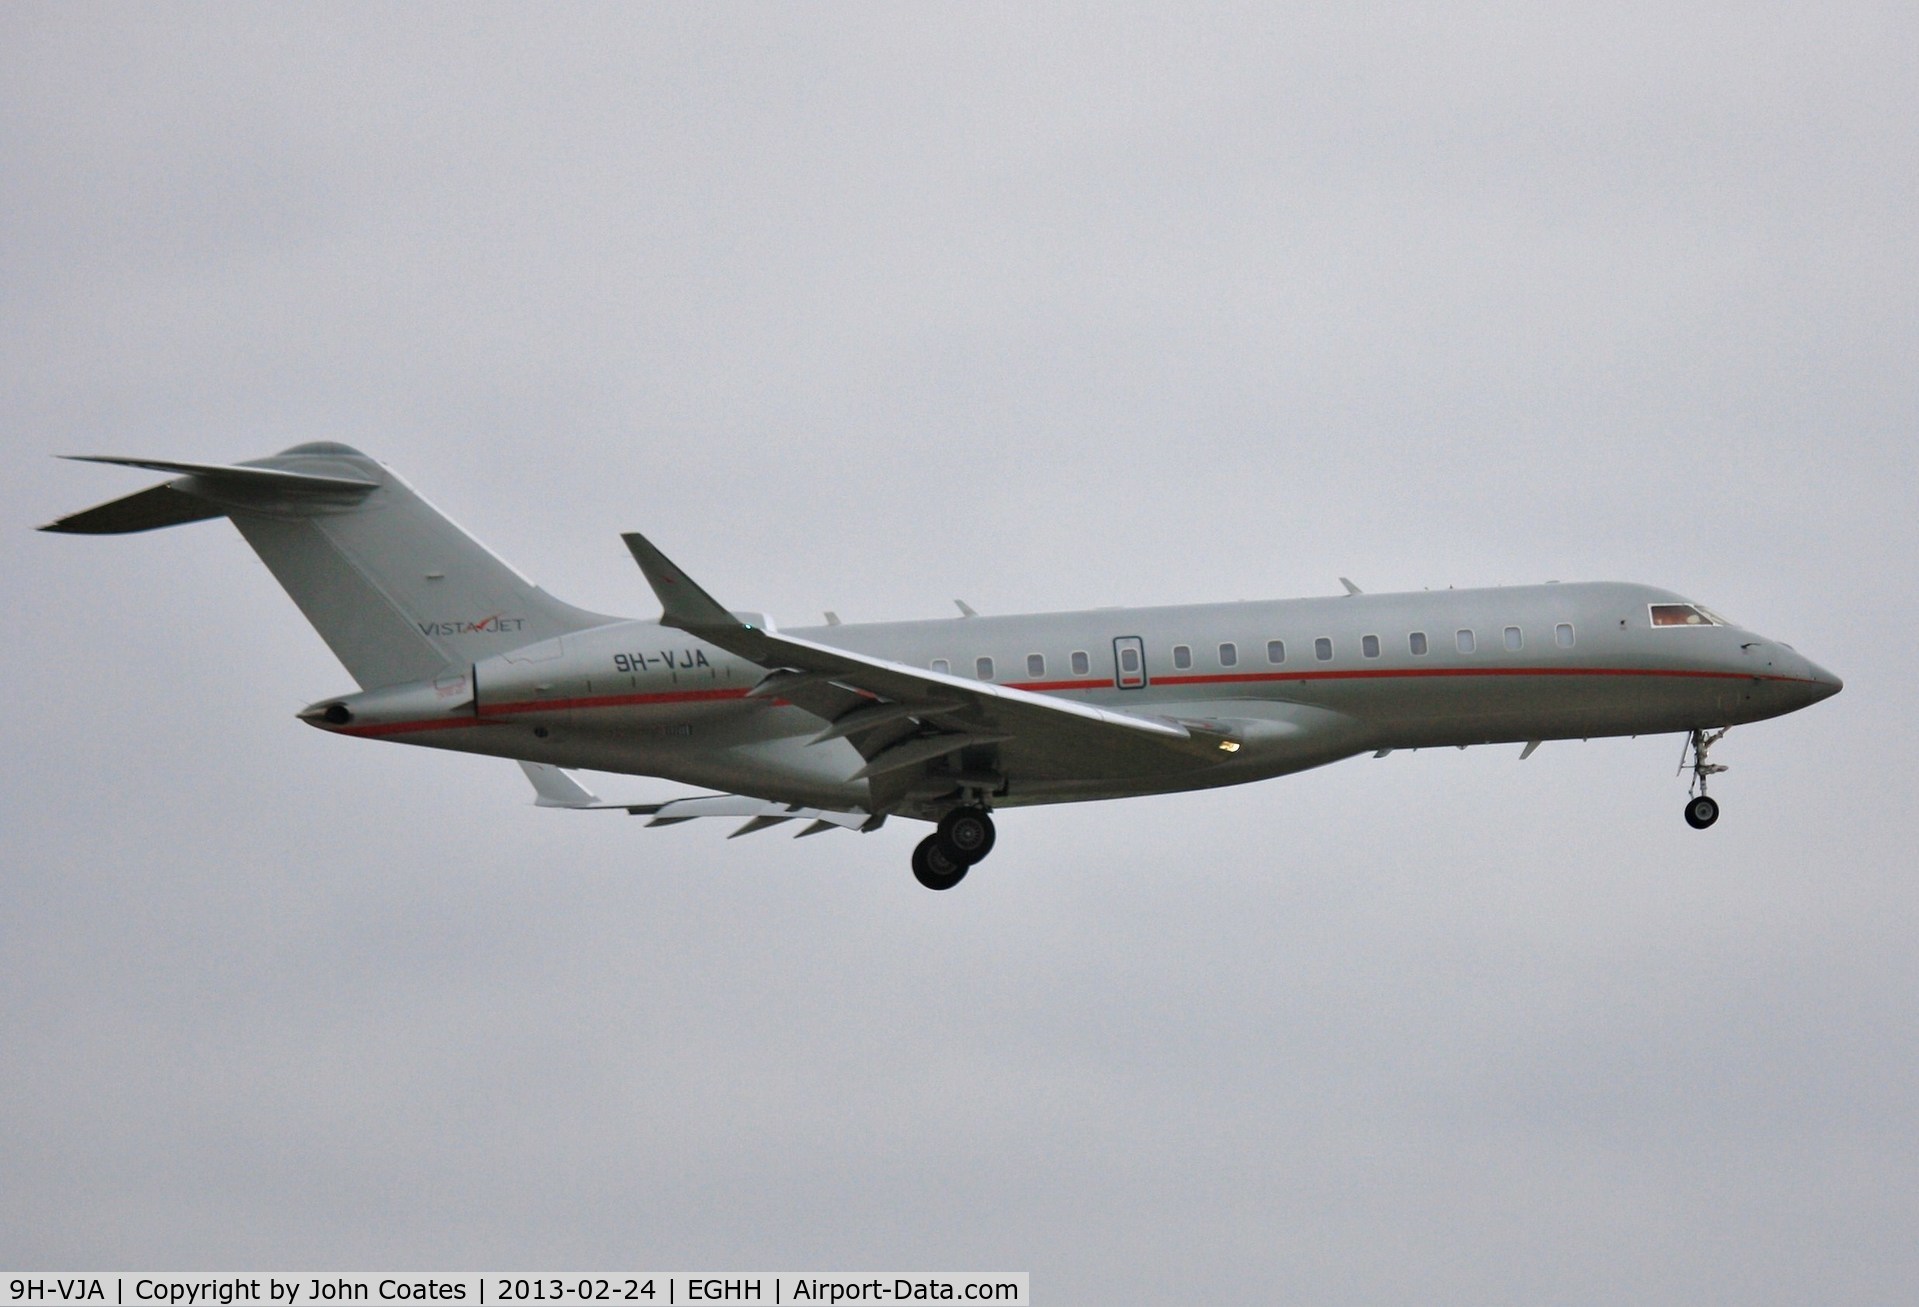 9H-VJA, 2011 Bombardier BD-700-1A10 Global Express XRS C/N 9441, Touch and Goes during training